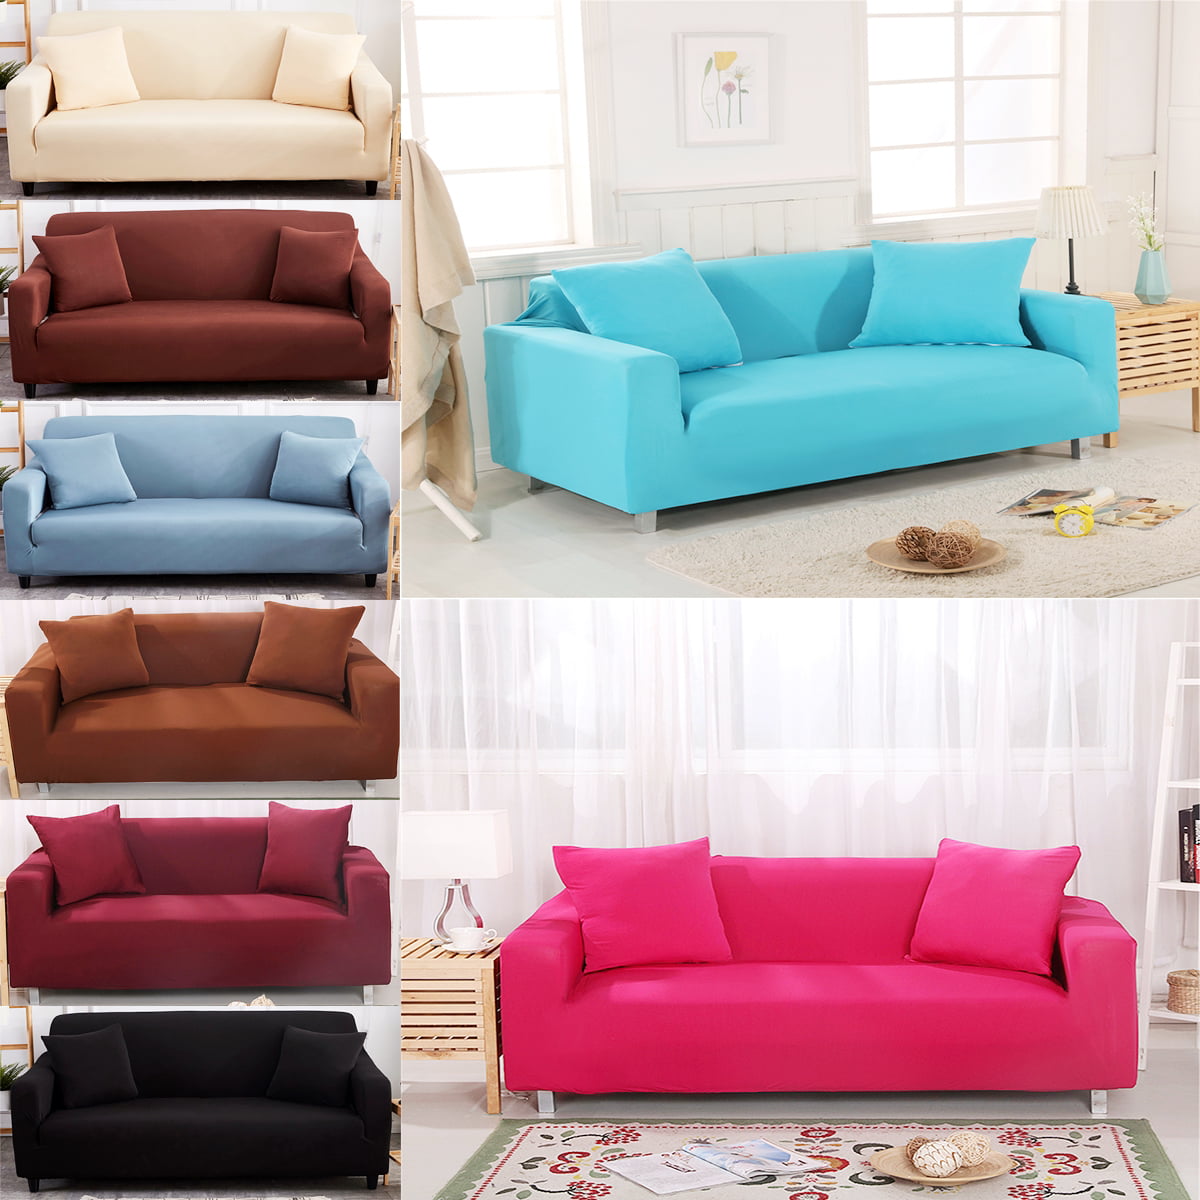 Details about   1/2 Seater Stretch Sofa Cover Couch Lounge Recliner Chair Slipcover Protector 